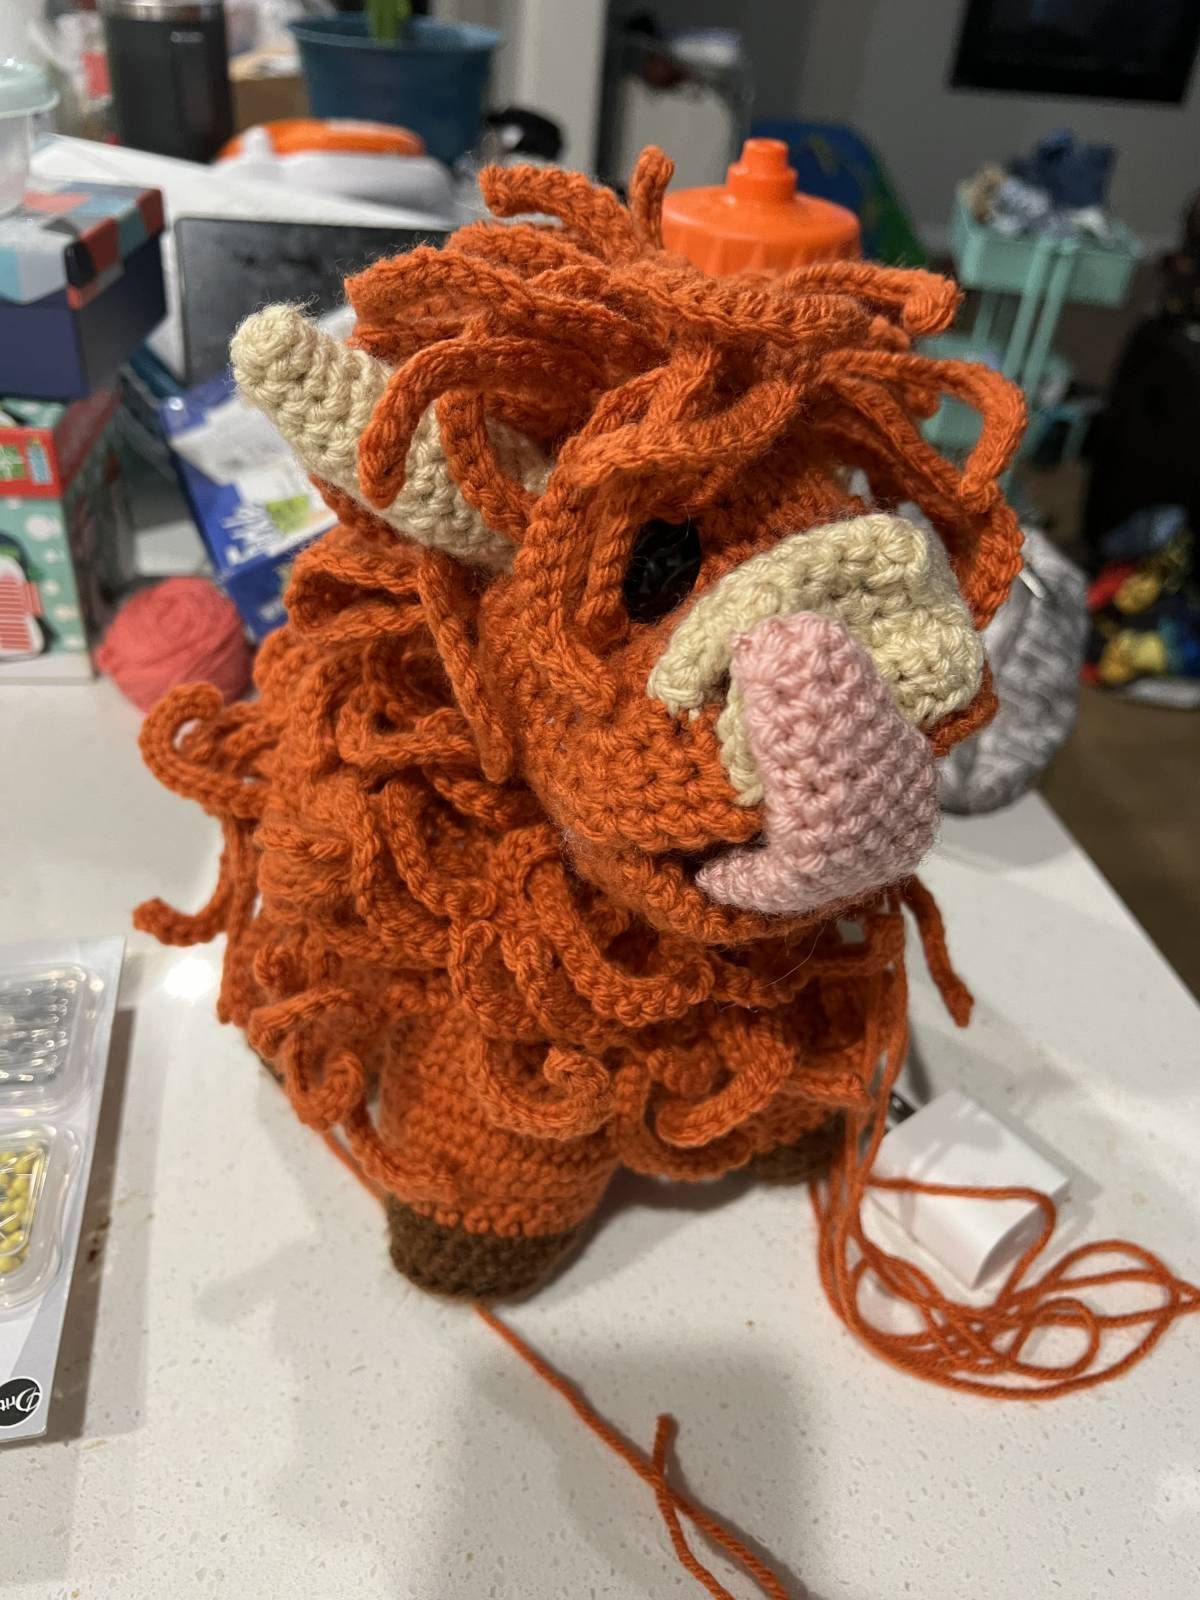 Highland Cow Crochet Amigurumi Pattern Review by Alexa Ream for Cottontail Whiskers